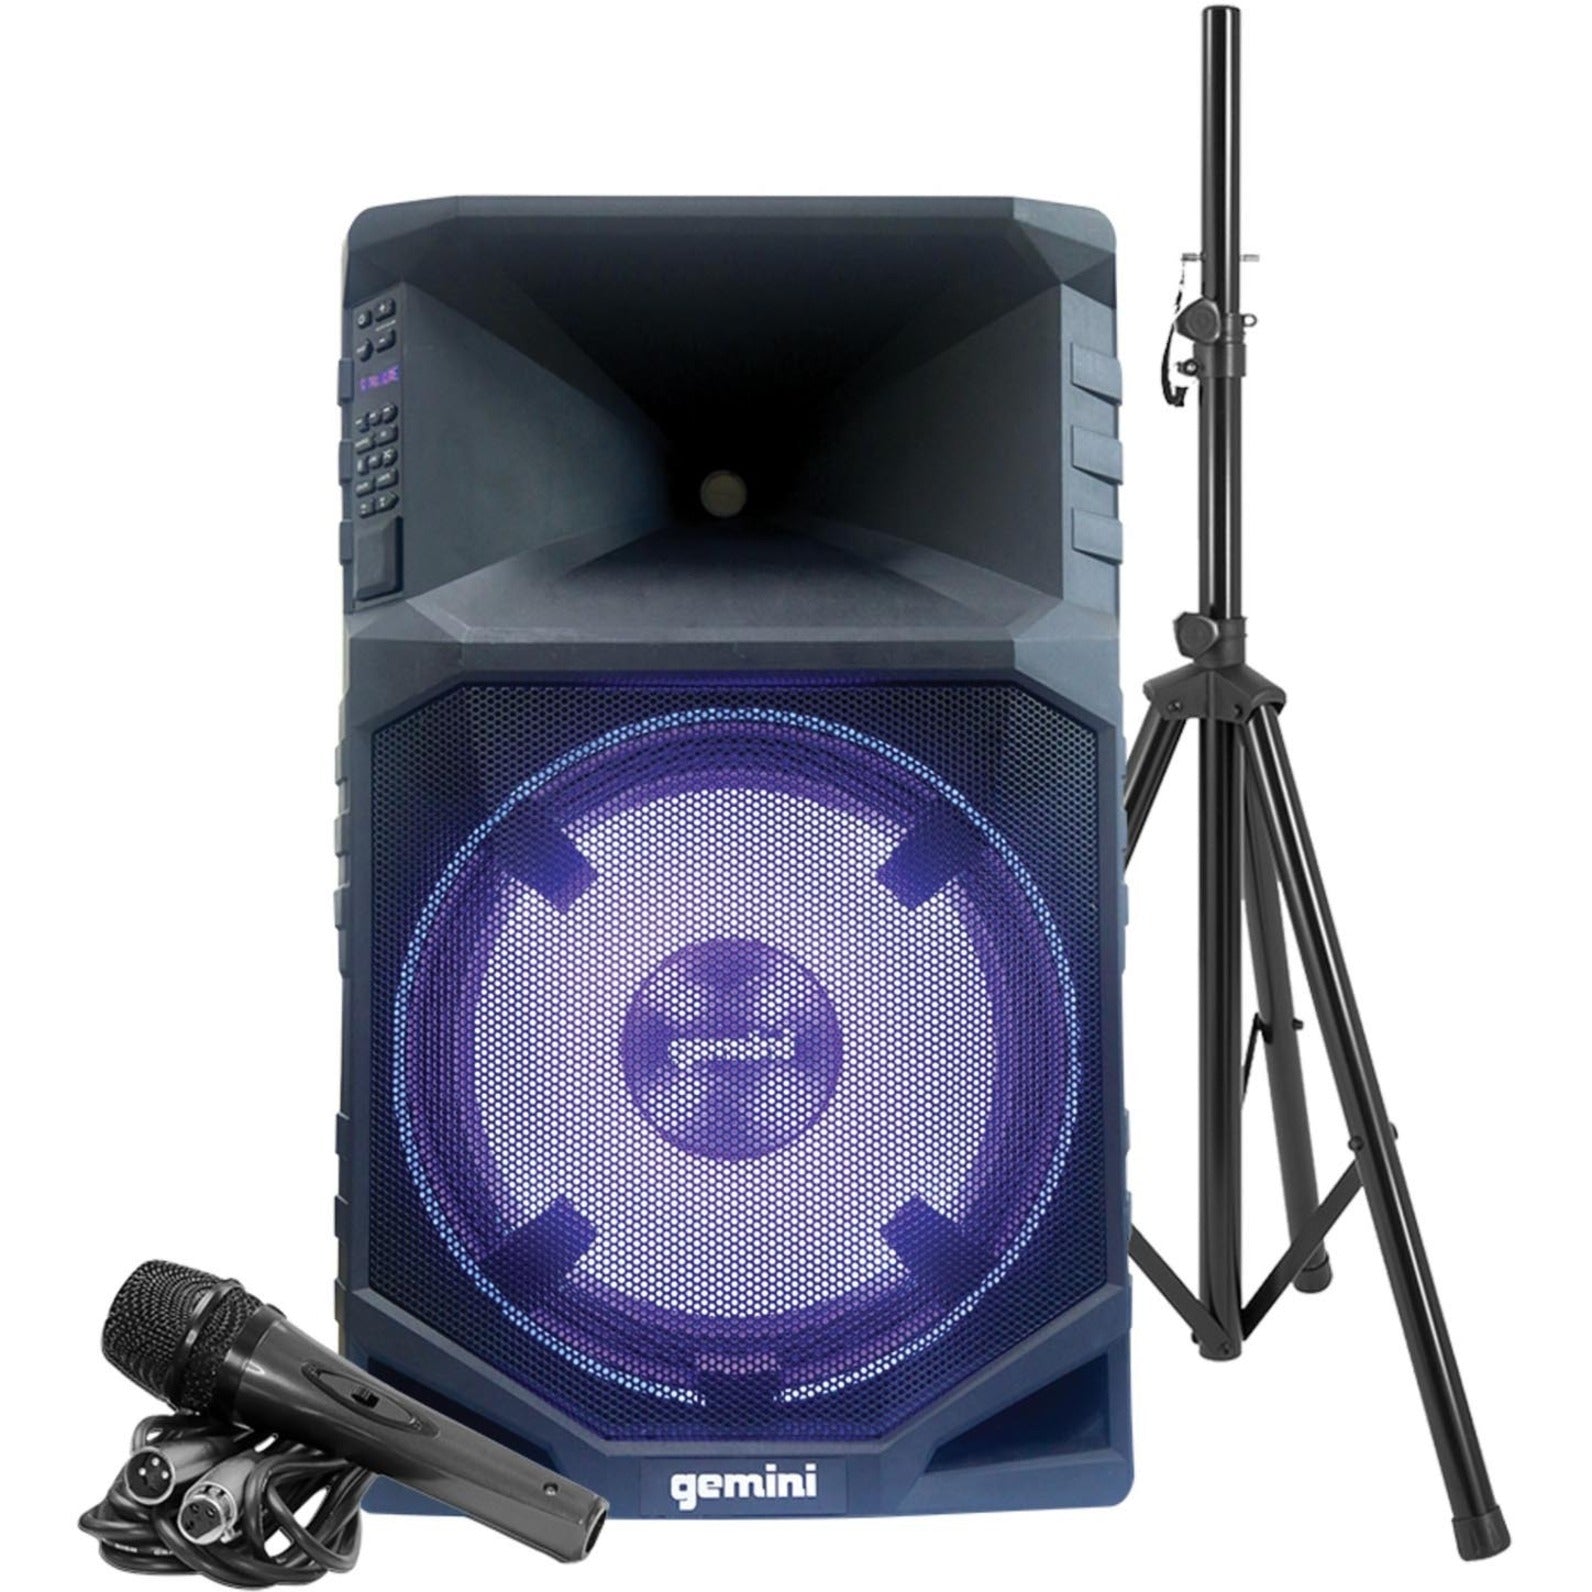 gemini GSW-T1500PK Public Address System, Weather Proof, IPX4, Built-in Rechargeable Battery, Radio, Media Player, Bluetooth, Portable [Discontinued]